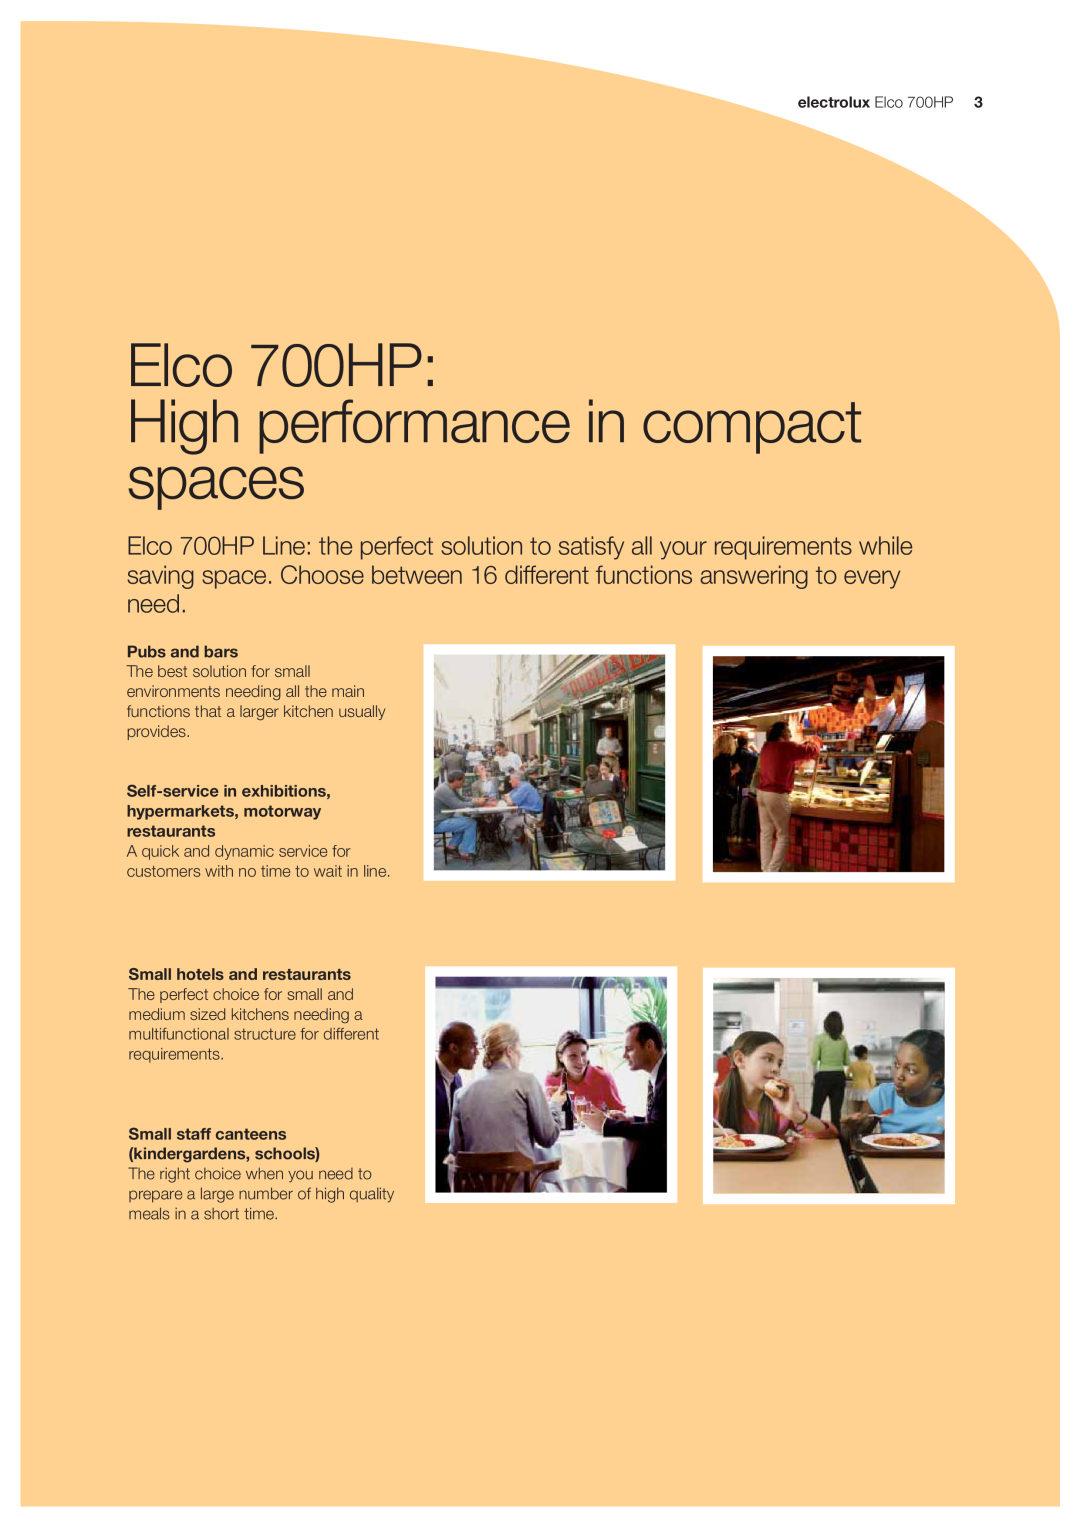 Electrolux manual Elco 700HP High performance in compact spaces, Pubs and bars, Small hotels and restaurants 